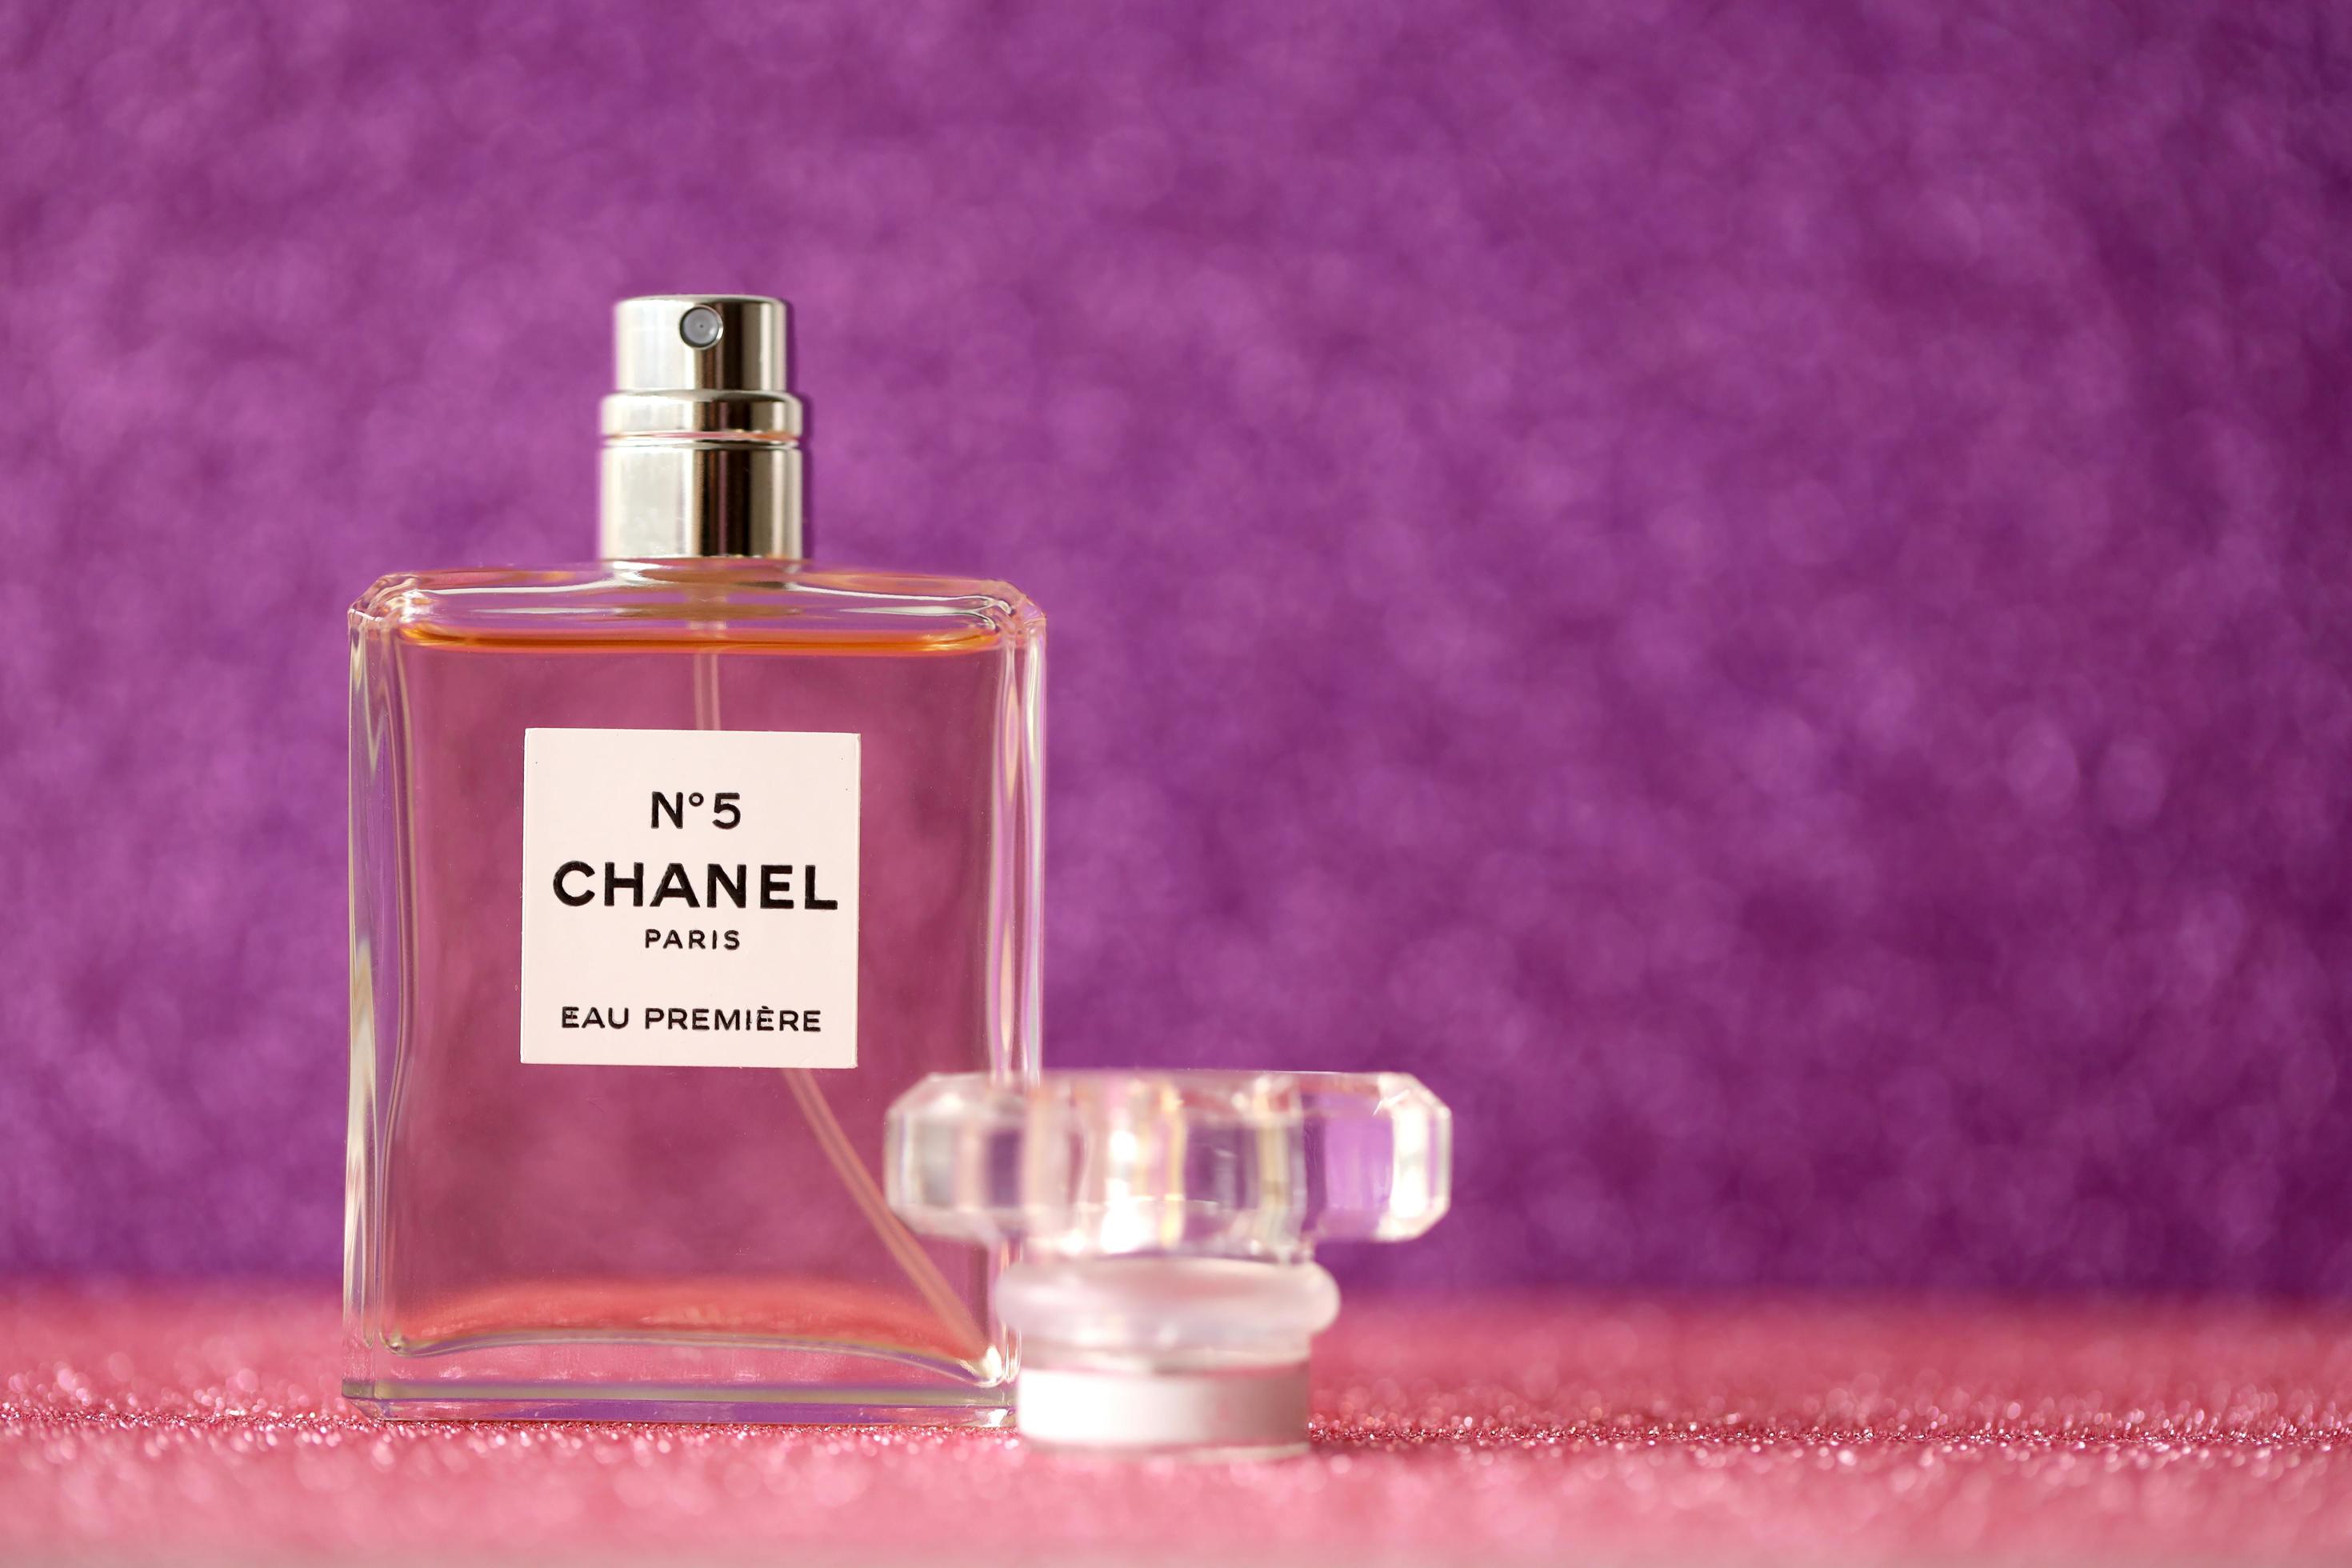 TERNOPIL, UKRAINE - SEPTEMBER 2, 2022 Chanel Number 5 Eau Premiere  worldwide famous french perfume bottle on shiny glitter background in purple  colors 13251561 Stock Photo at Vecteezy